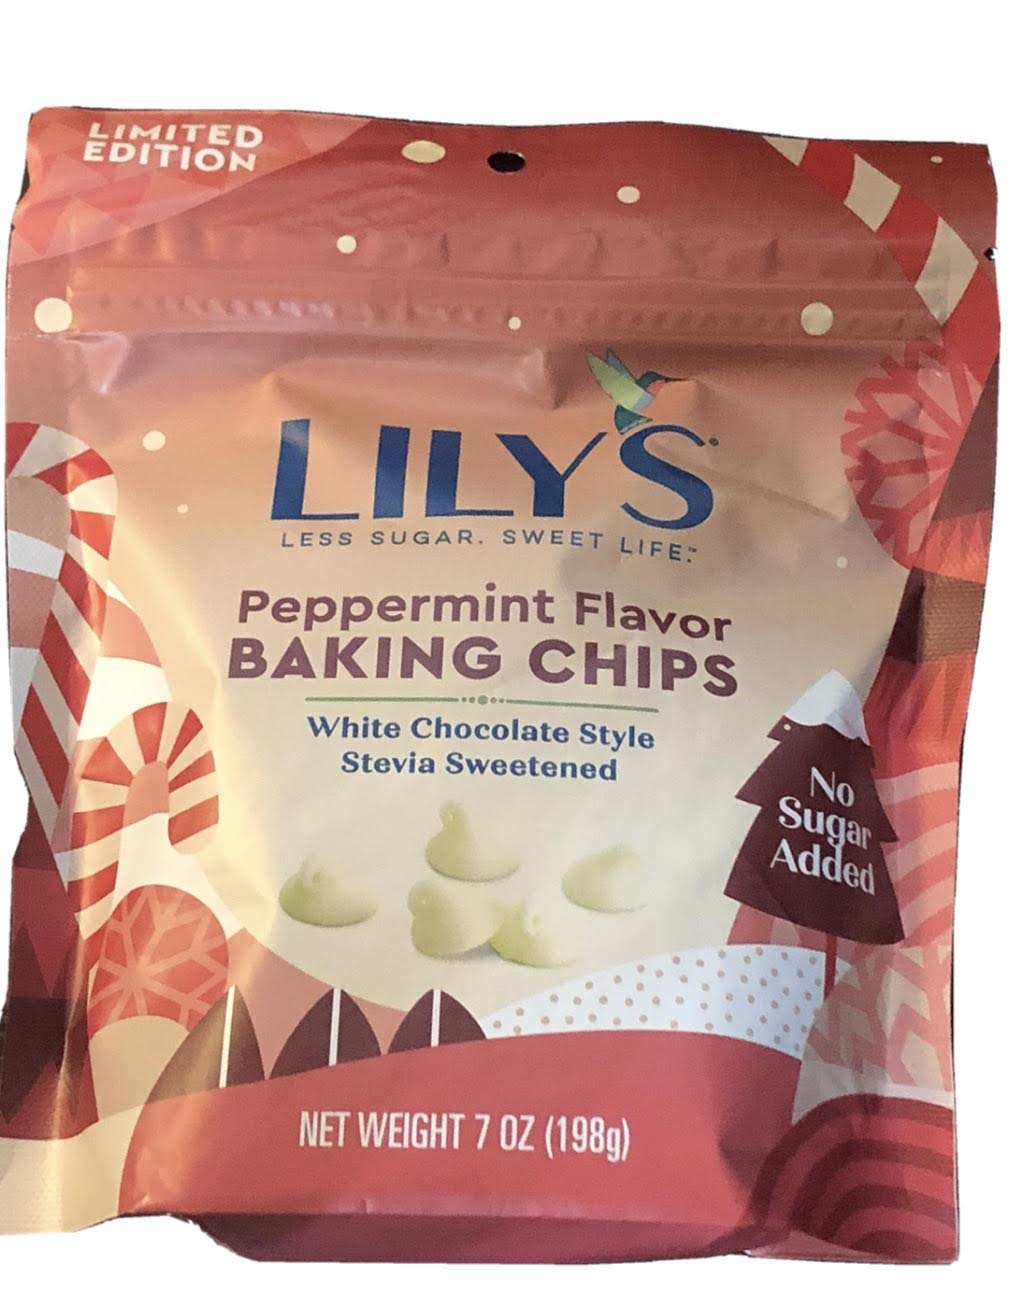 Lily's Peppermint Flavor Baking Chips
